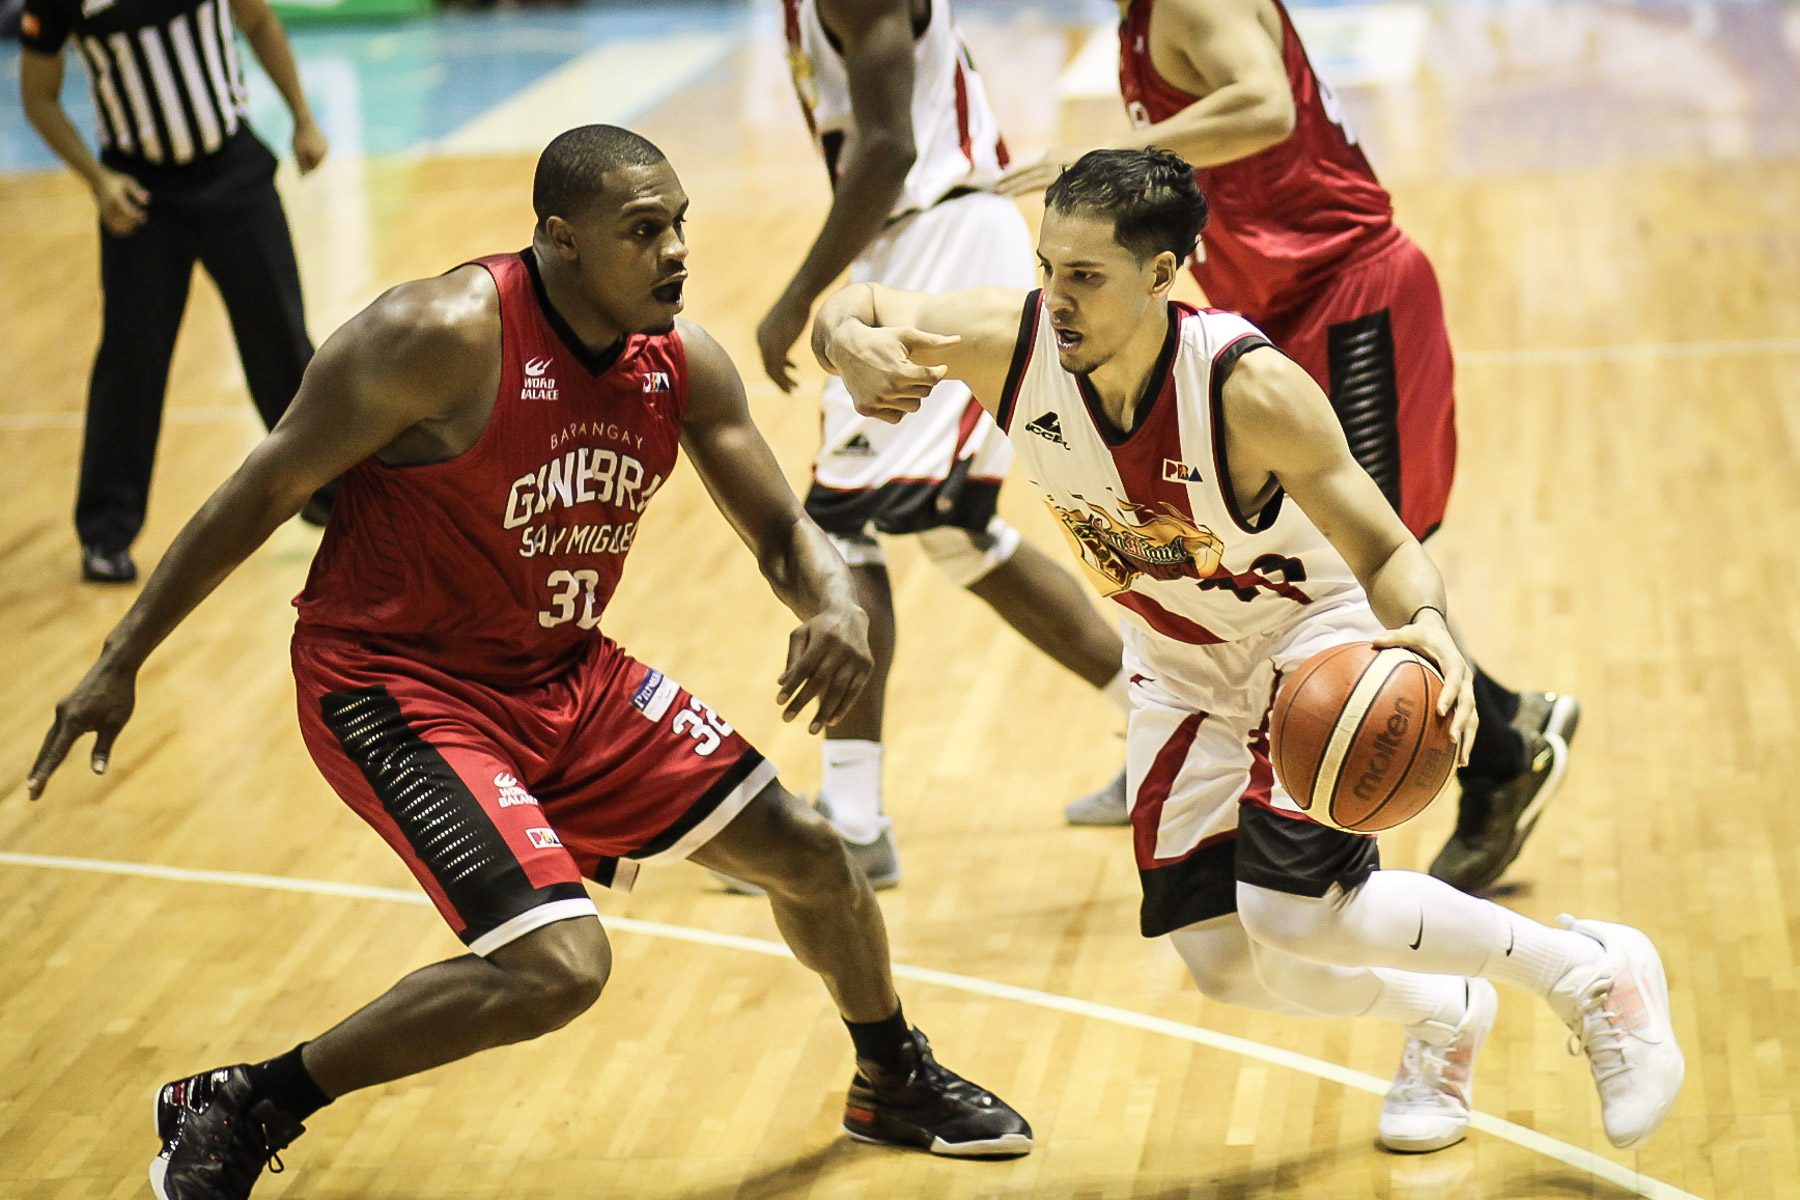 Lassiter, San Miguel deflate Ginebra to force semis game 5